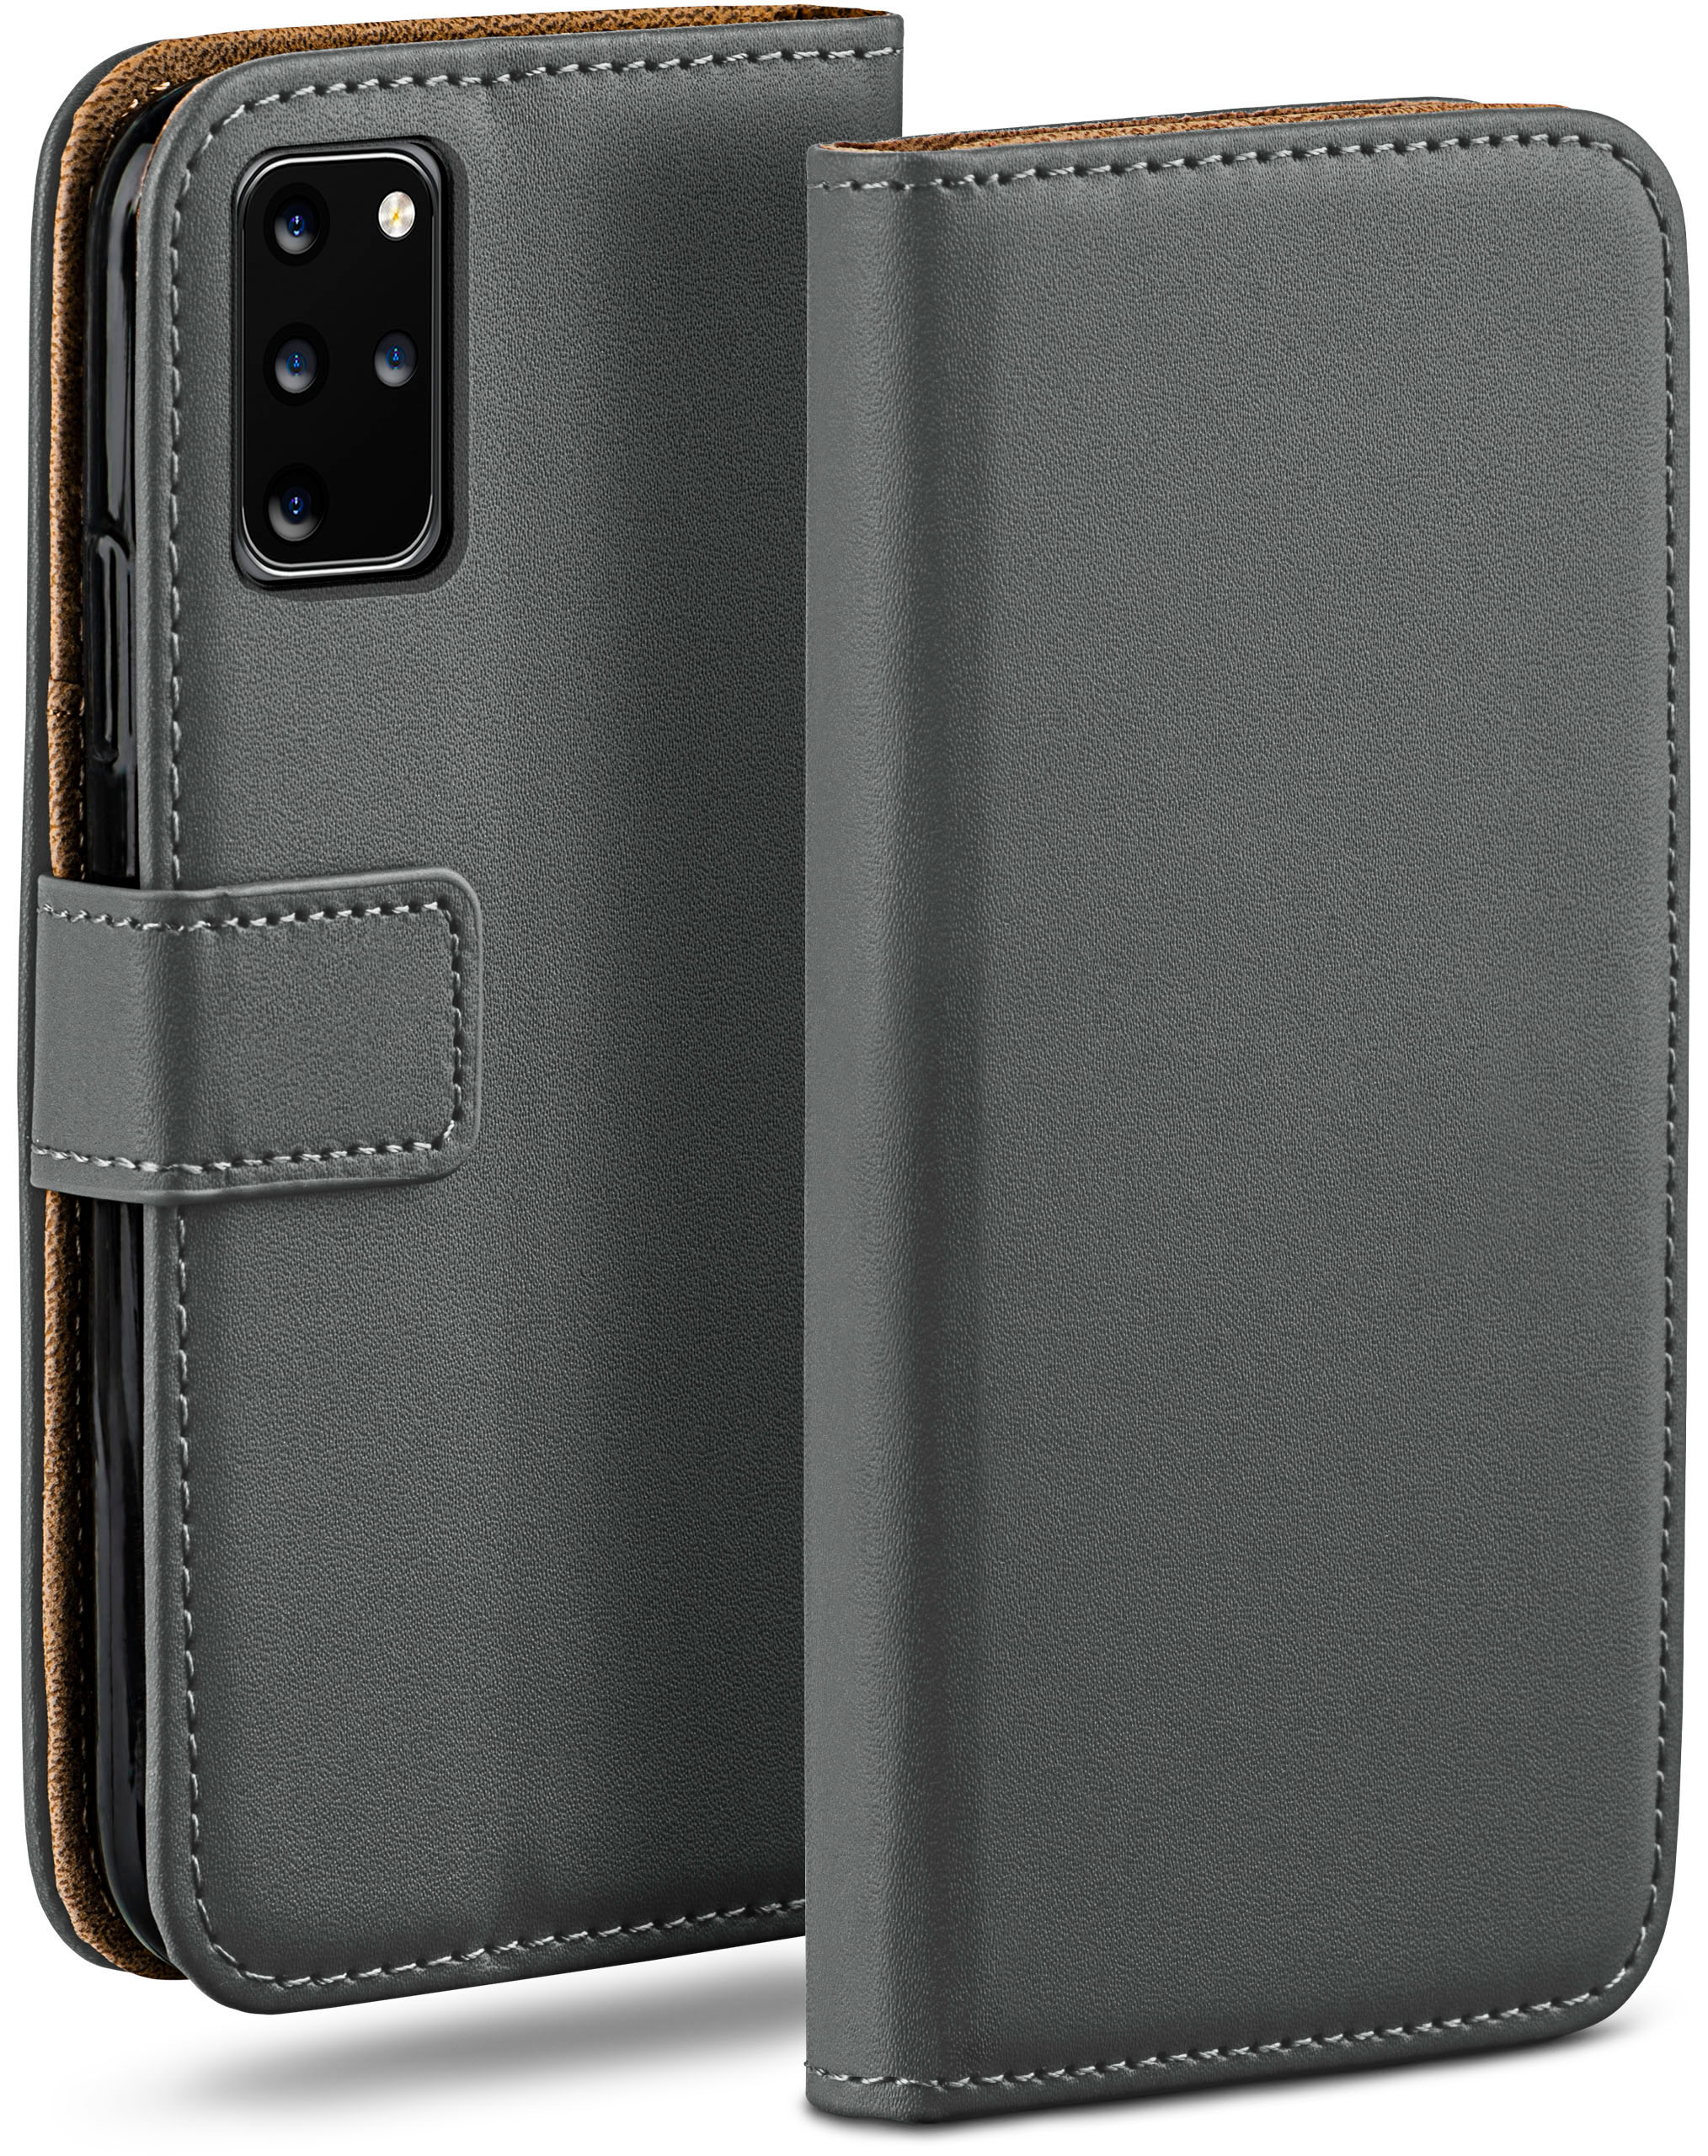 5G, MOEX Galaxy Samsung, Anthracite-Gray S20 Plus Case, Book Bookcover, /